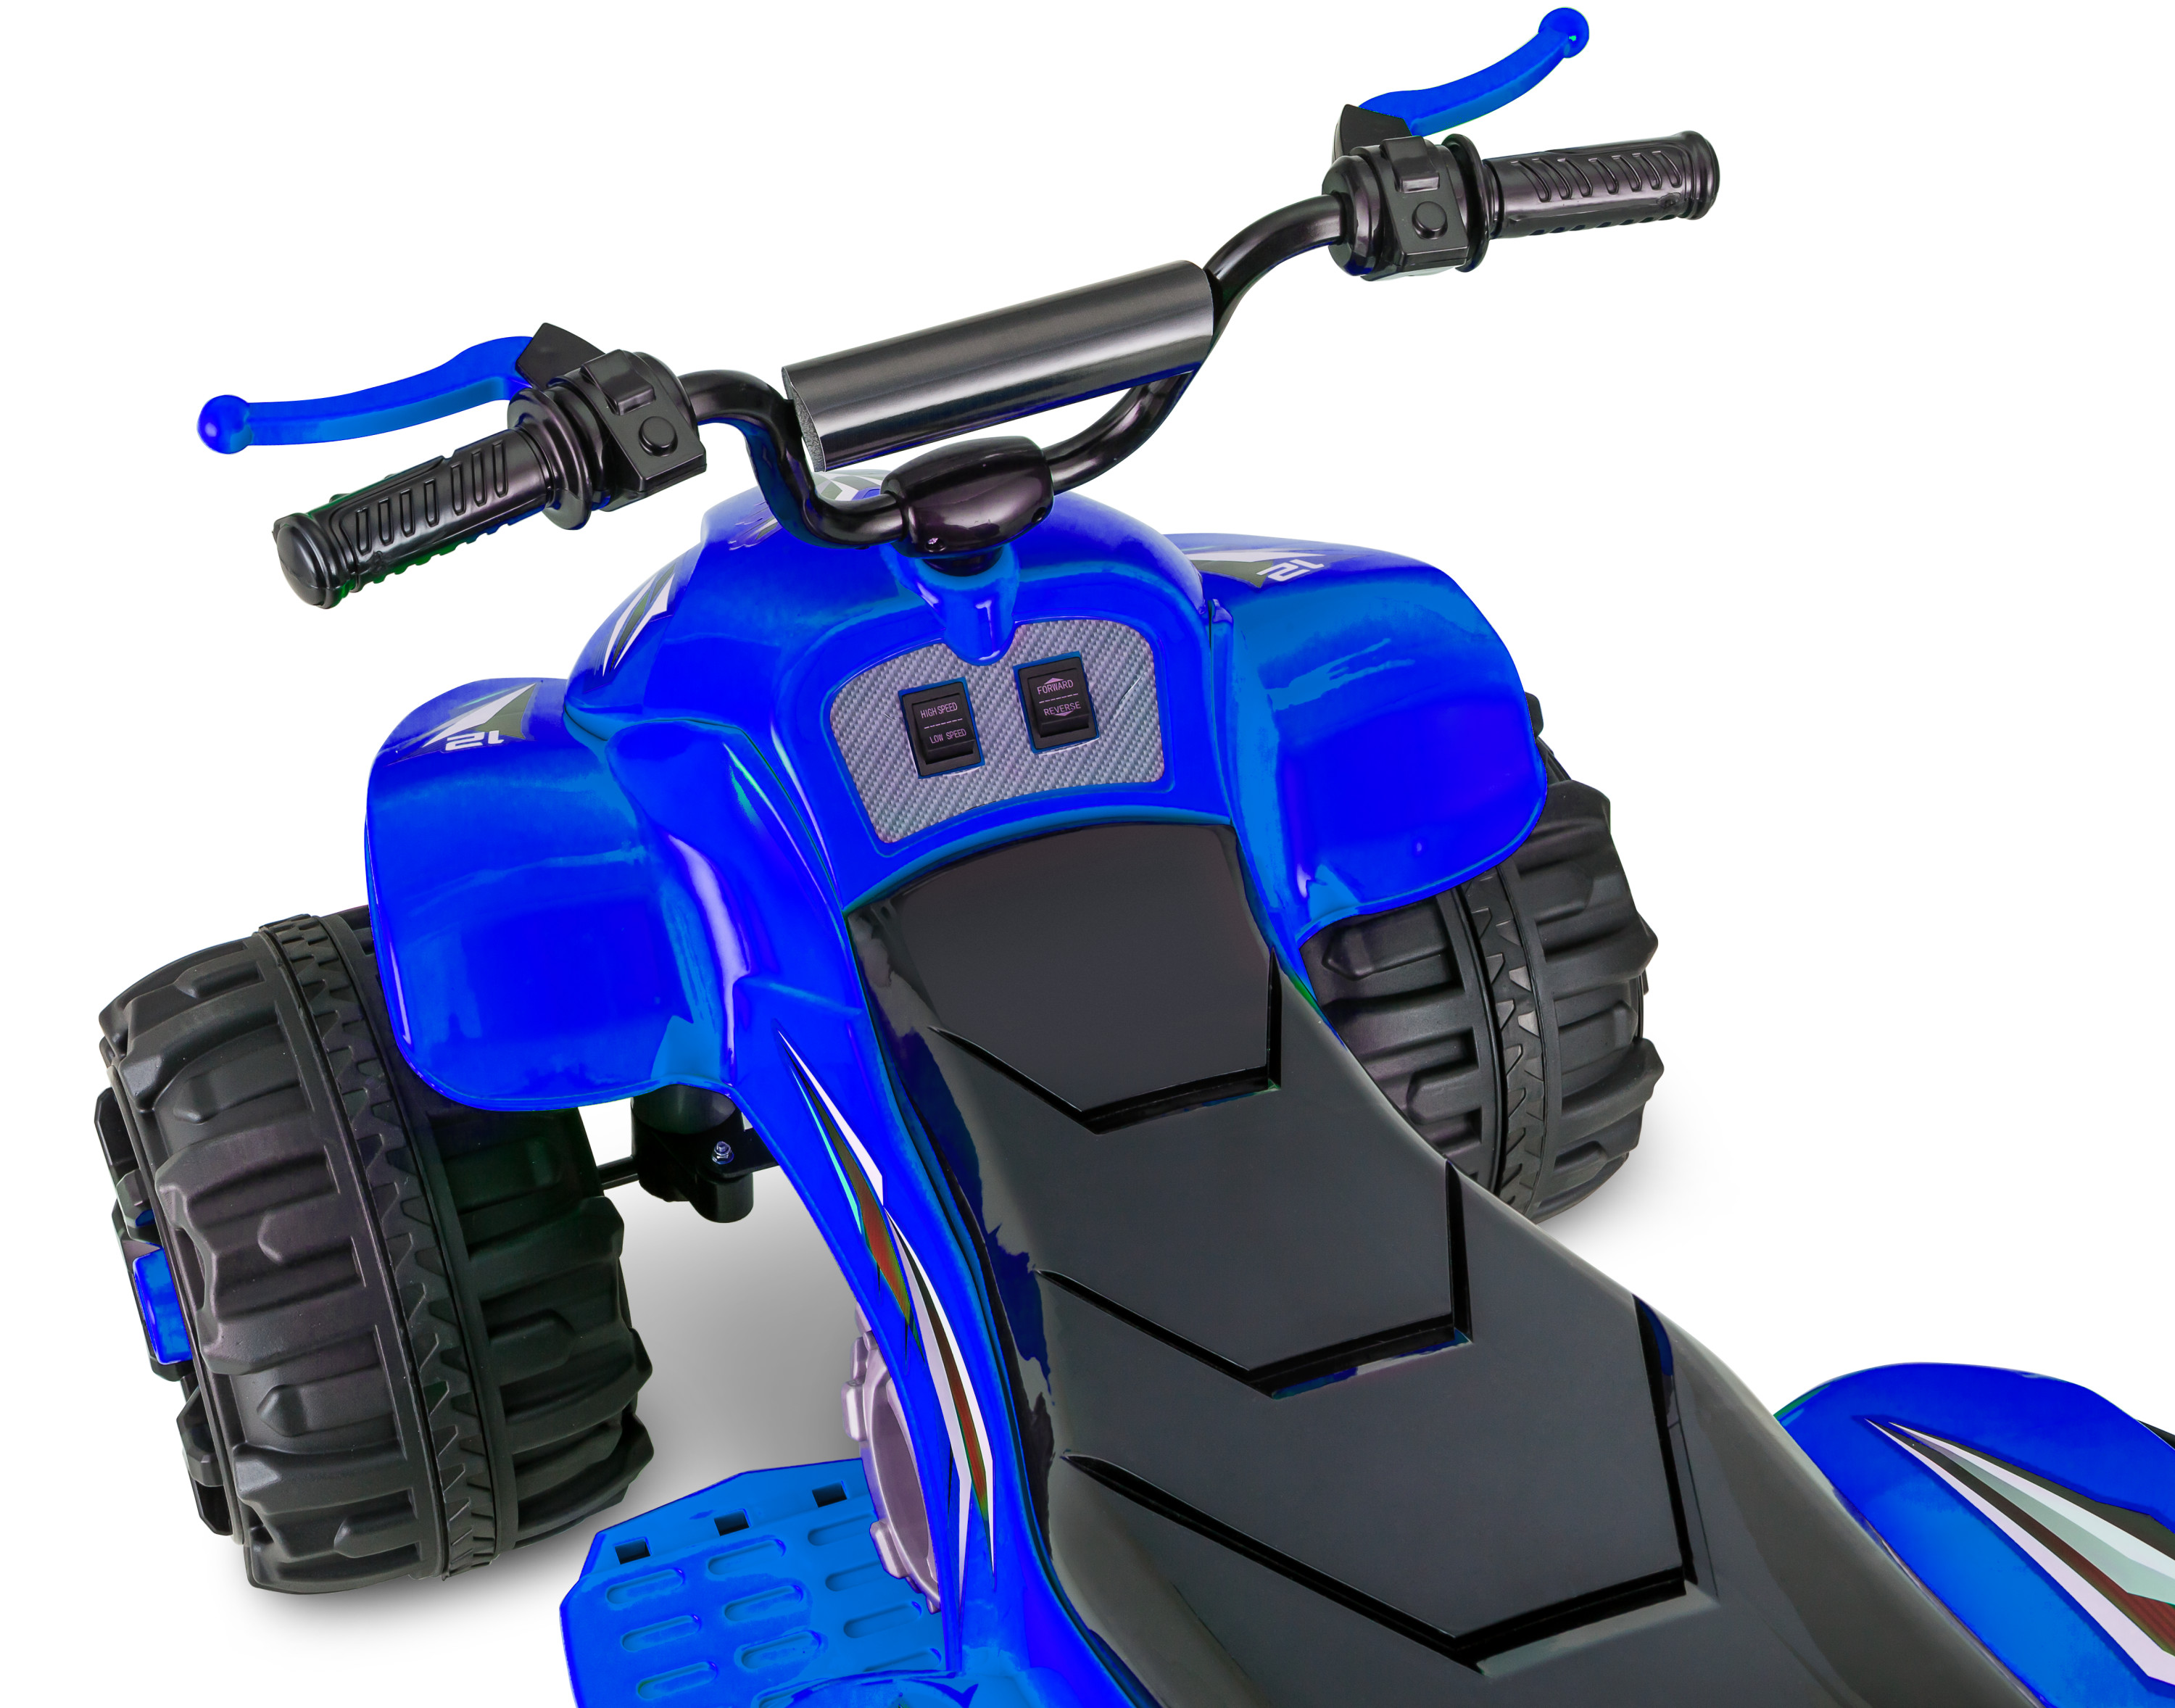 Sport ATV, 12-Volt Ride-On Toy by Kid Trax, ages 3+, blue - image 4 of 5